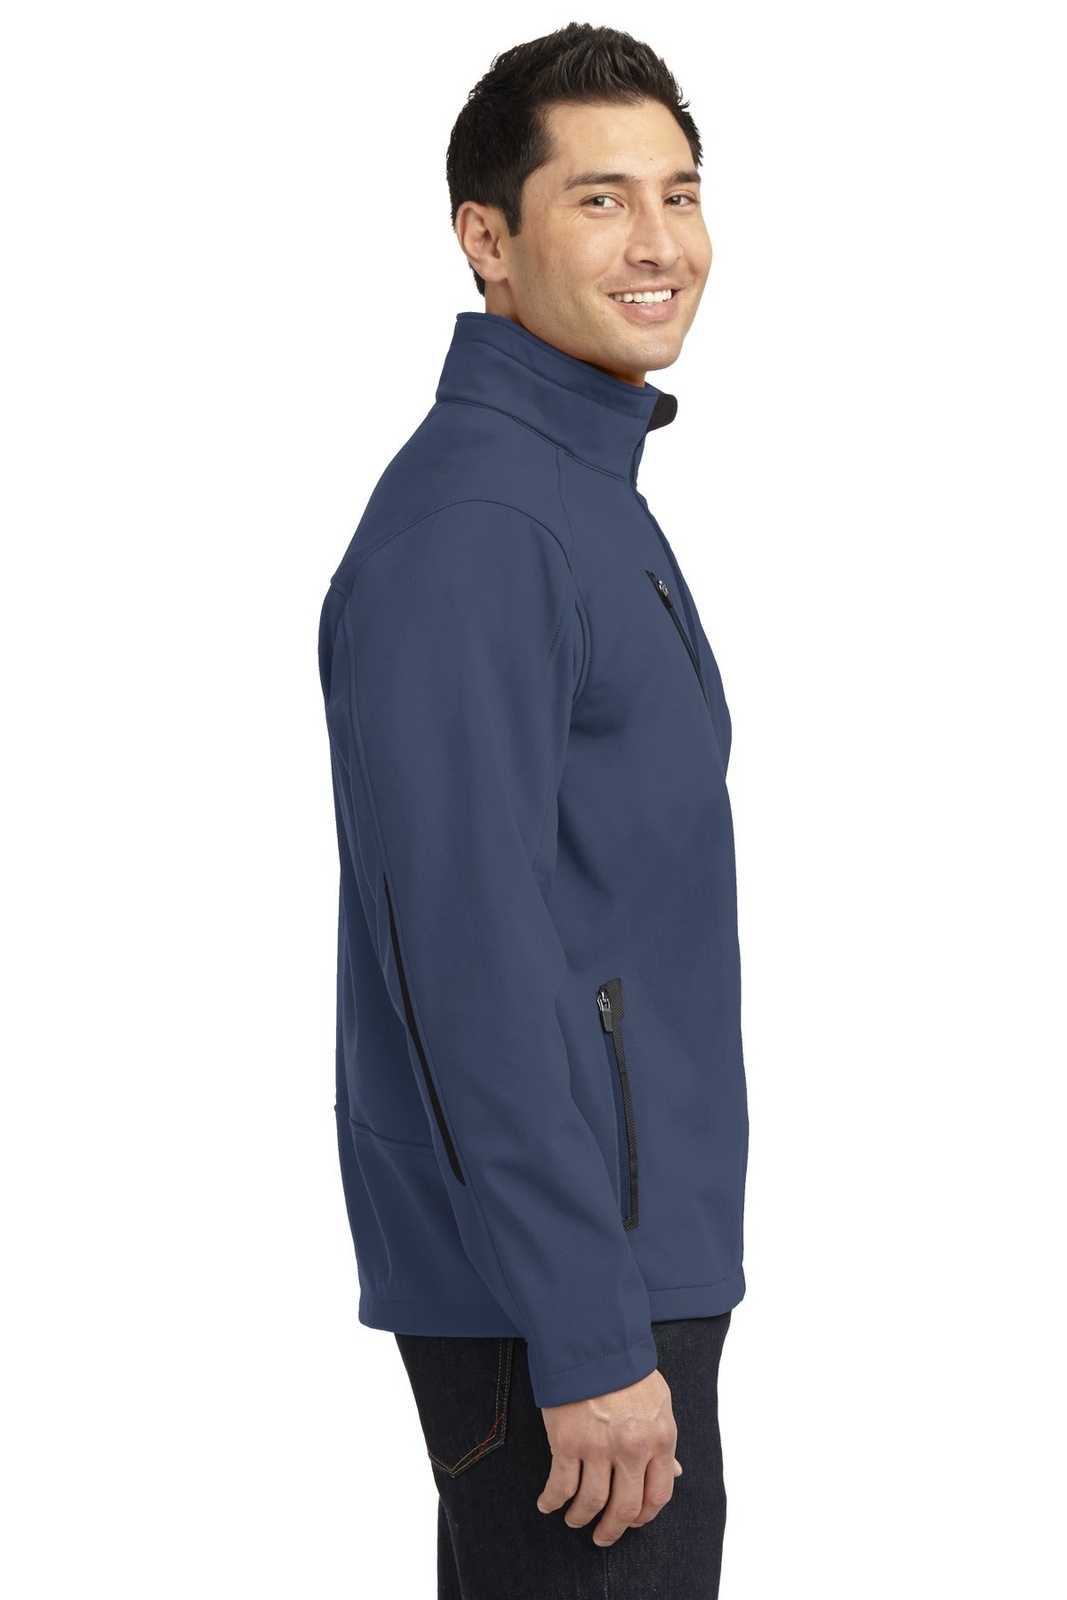 Port Authority J324 Welded Soft Shell Jacket - Dress Blue Navy - HIT a Double - 3